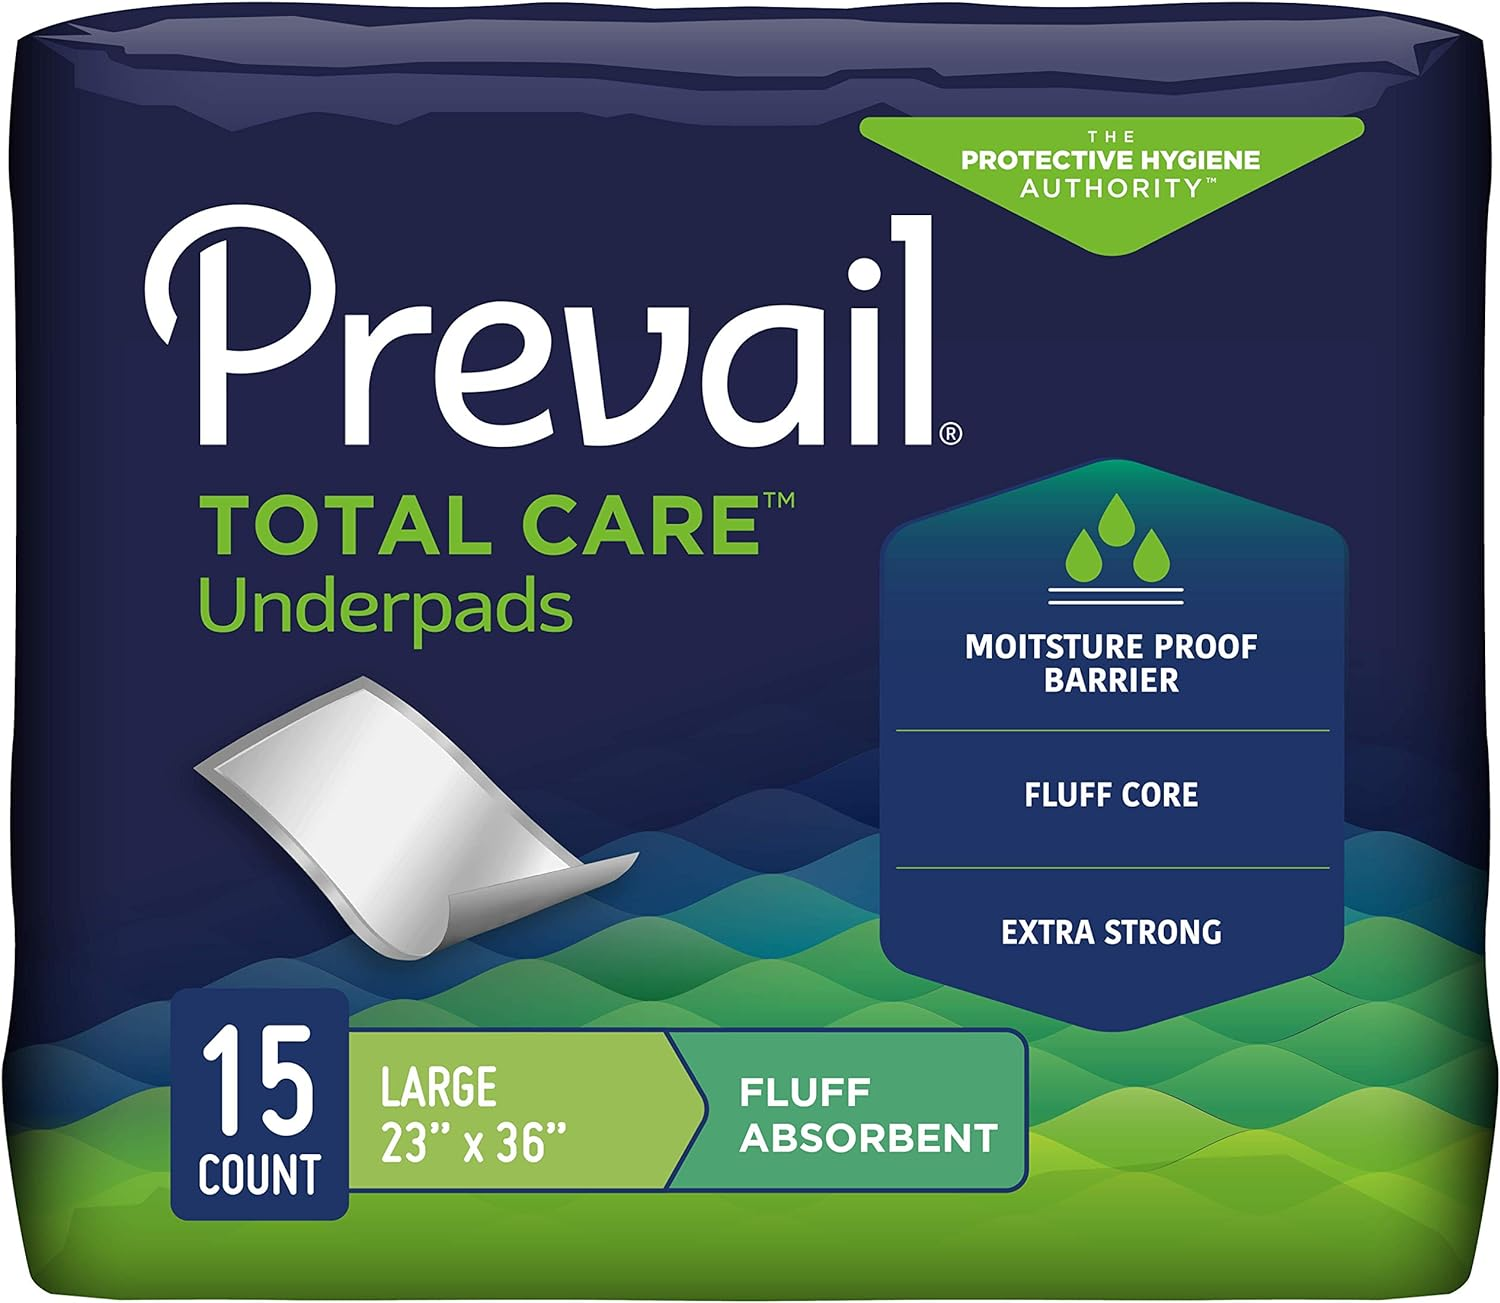 NorthShore Premium Extra-Absorbent Disposable Chux Underpads